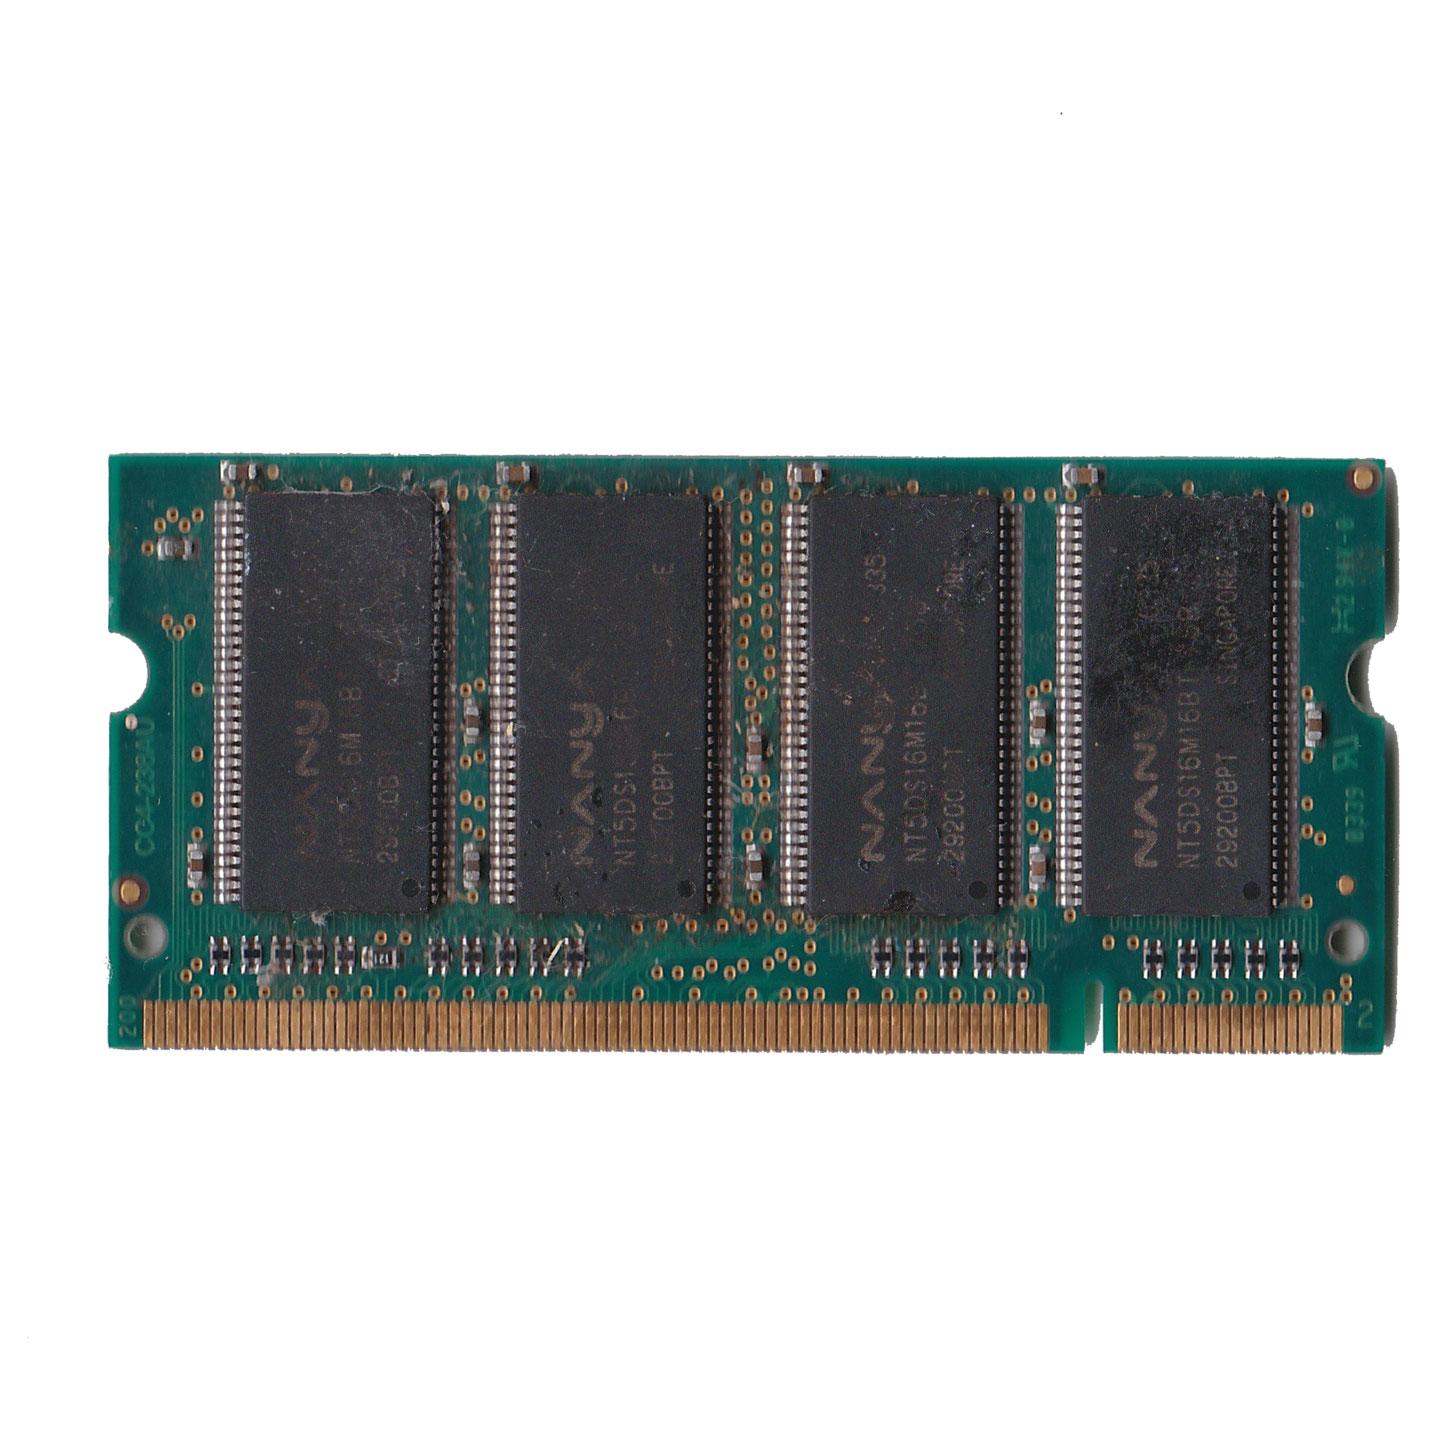 Preowned NANYA 256MB LAPTOP RAM DDR-266MHz-CL-2.5 PC2100S-25330 Memory Module (Untested)